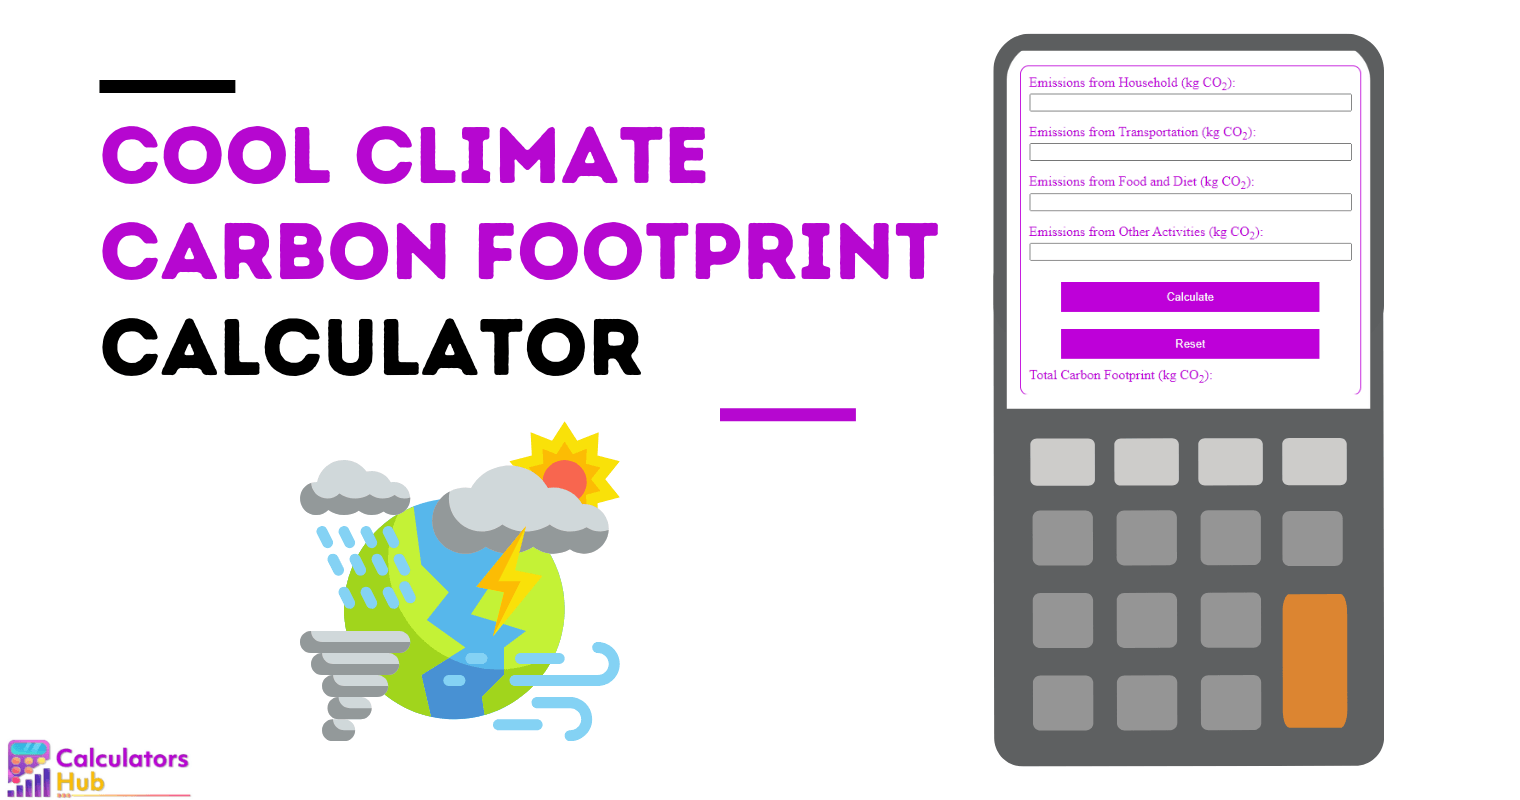 Cool Climate Carbon Footprint Calculator